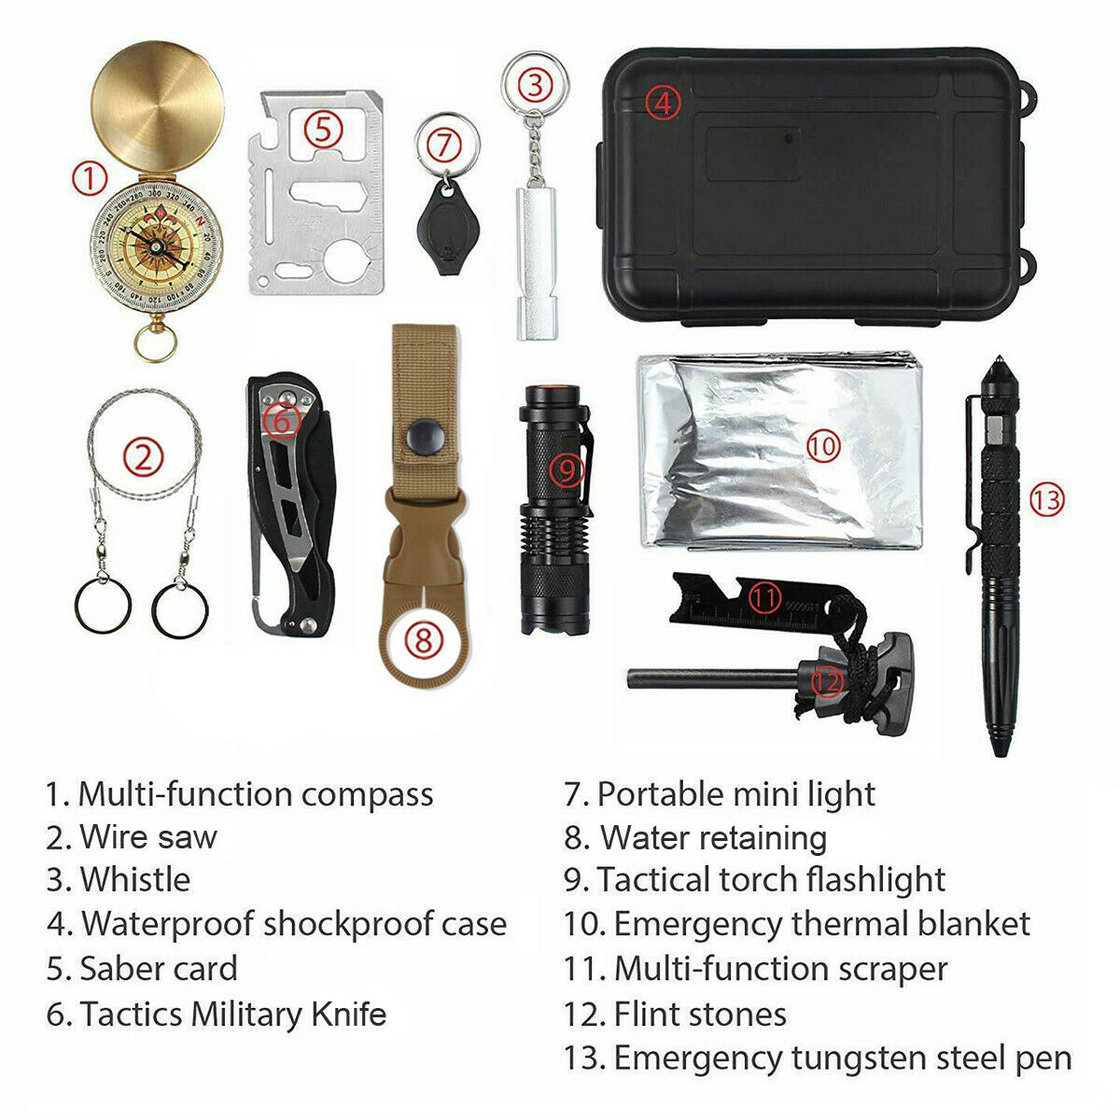 14-in-1 Outdoor Emergency Survival Gear Kit - Camping Tactical Tools SOS EDC Case